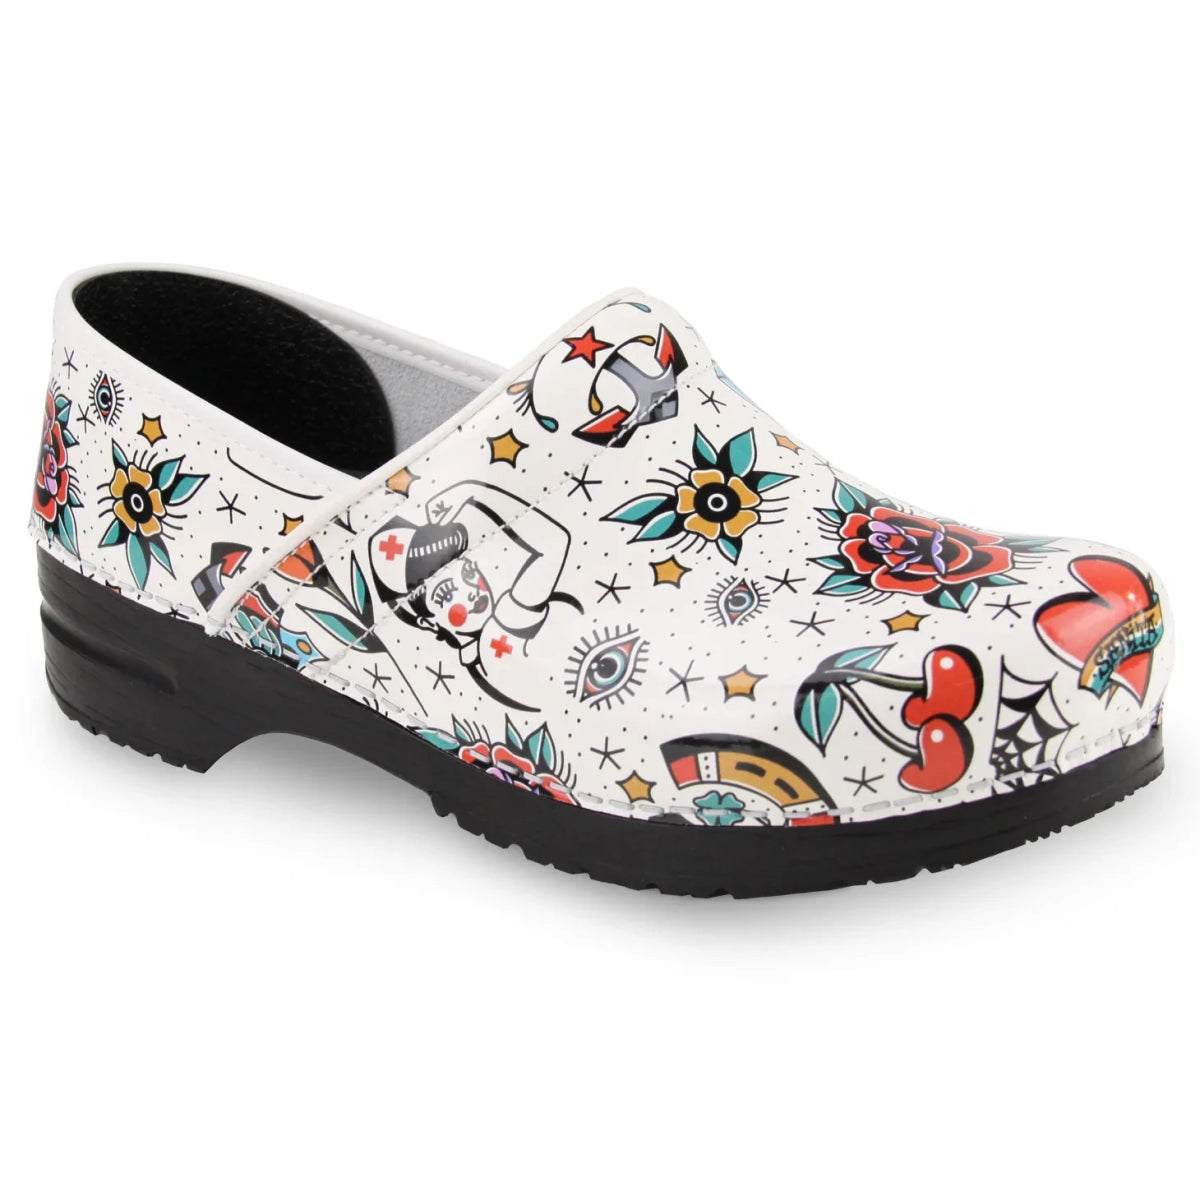 SANITA ROCKABILLY UNISEX CLOG IN WHITE - TLW Shoes